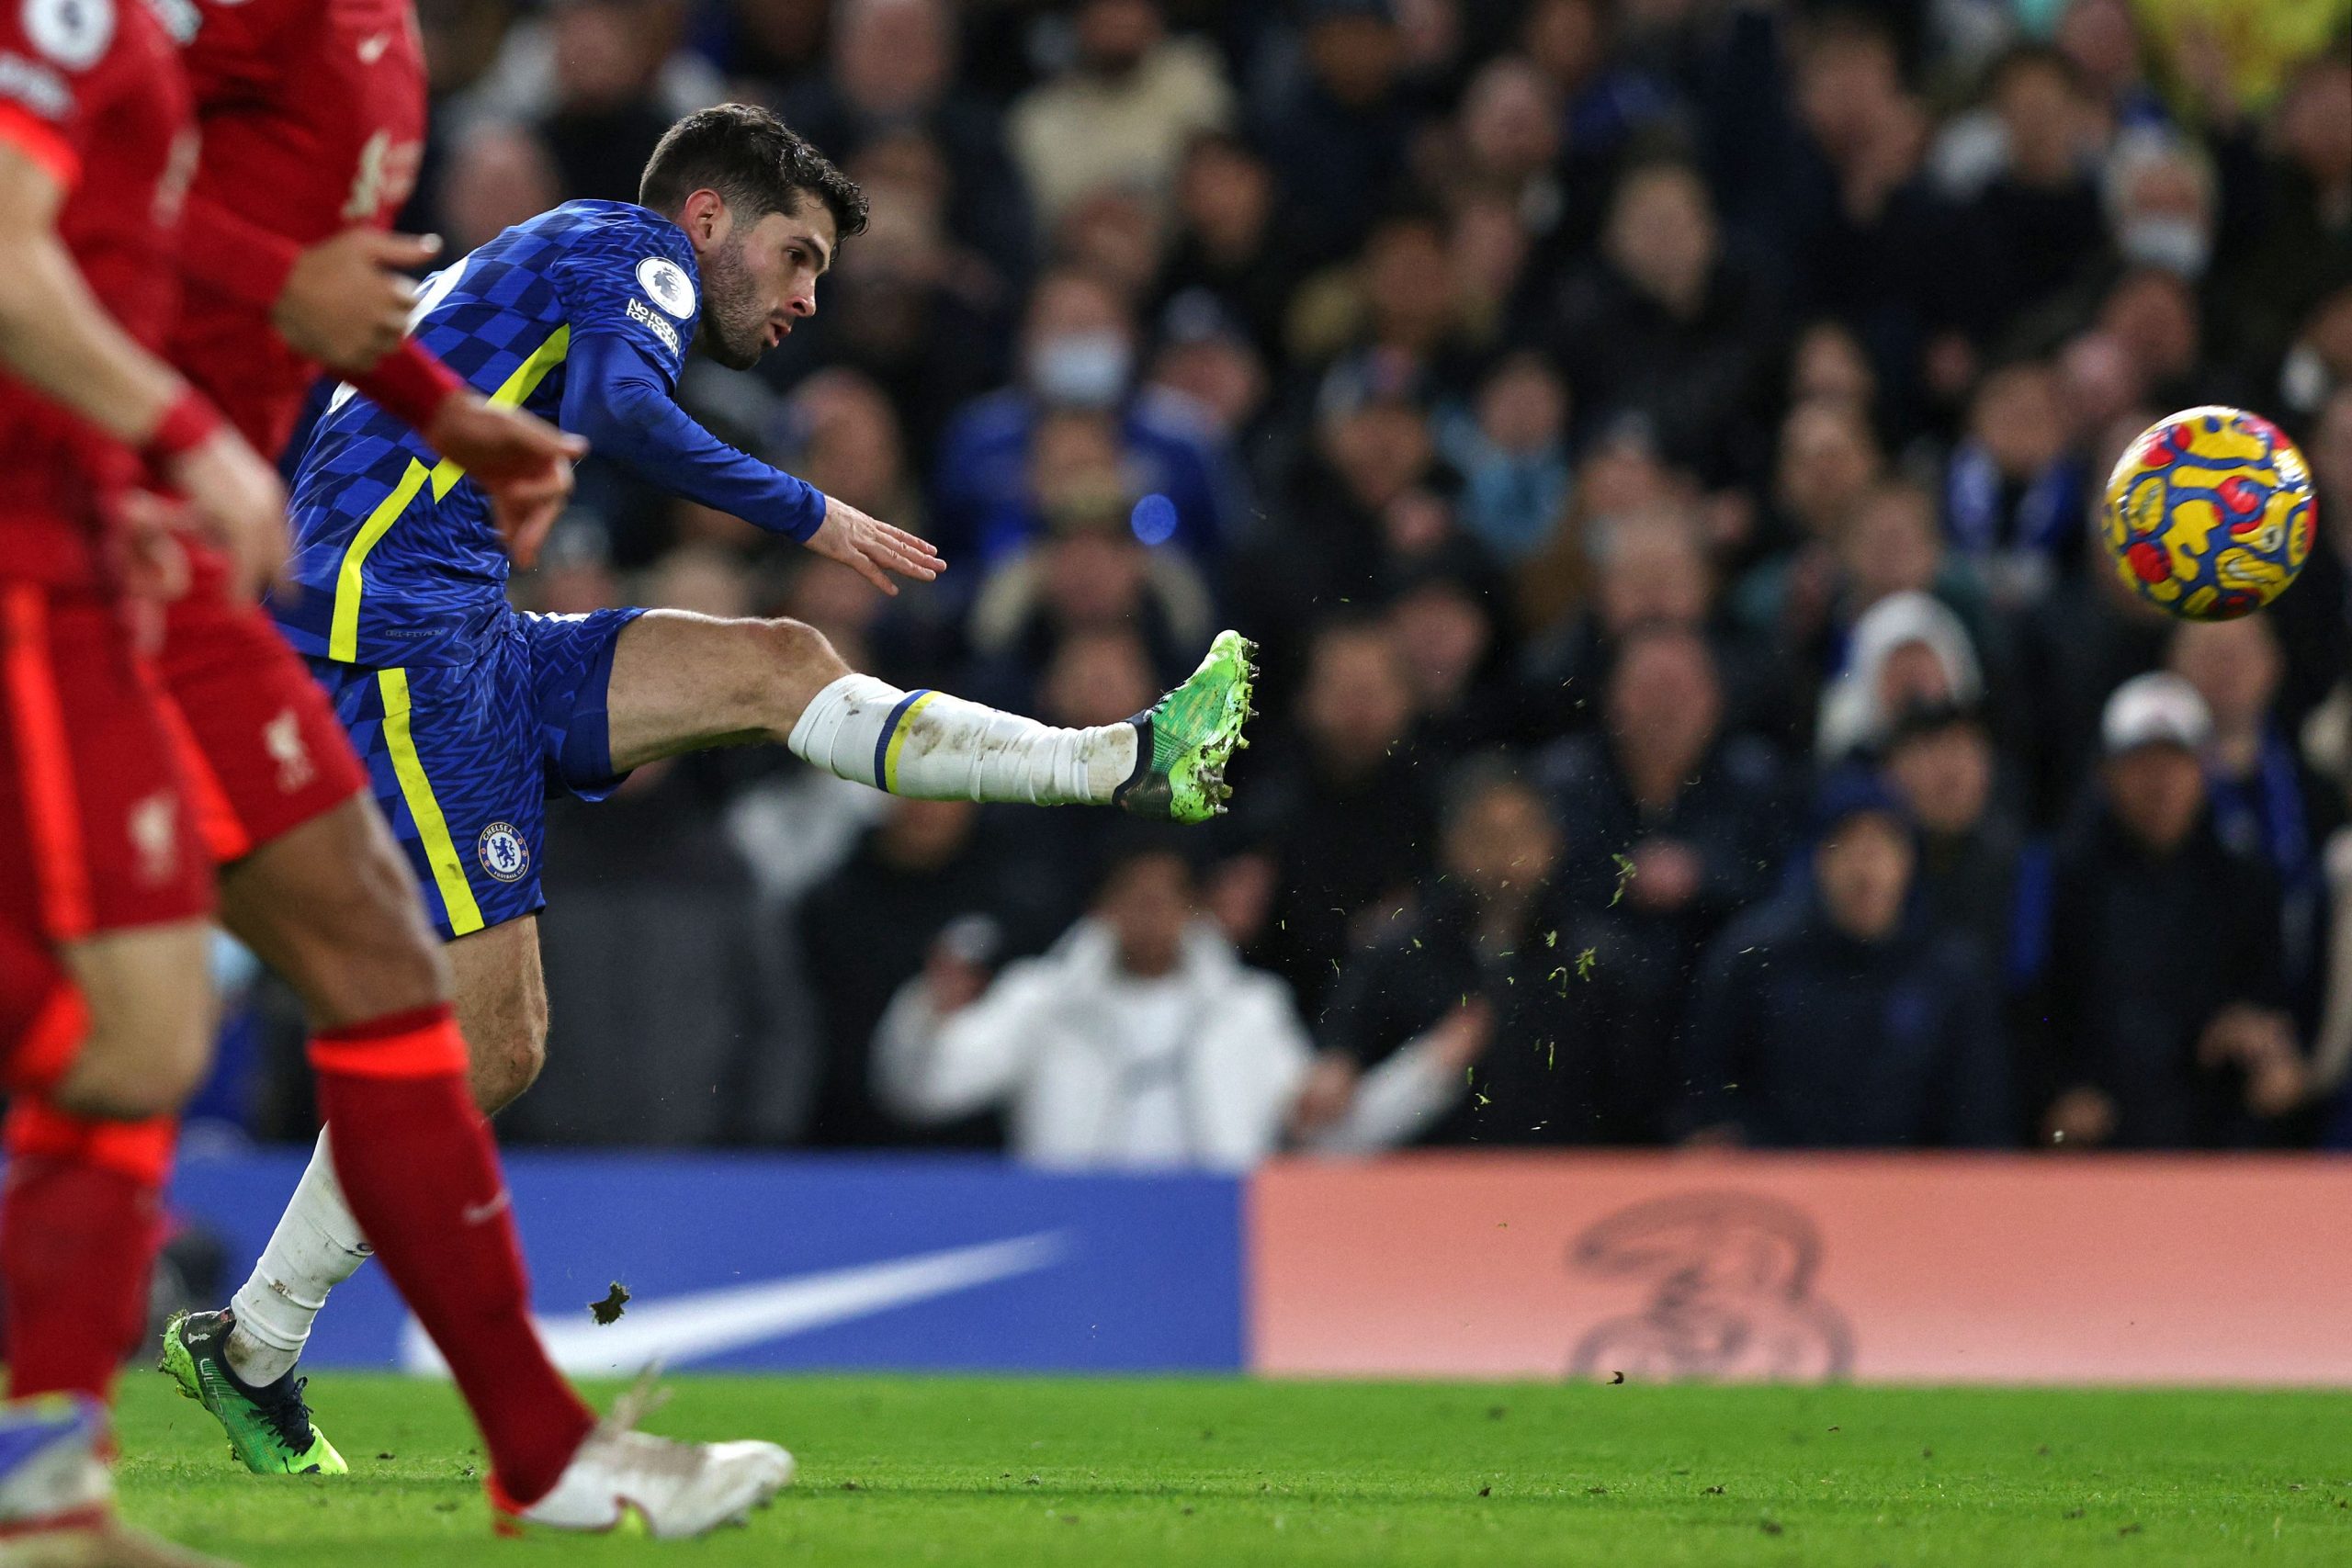 Some fans react on Twitter as Chelsea fight back to draw 2-2 against Liverpool .